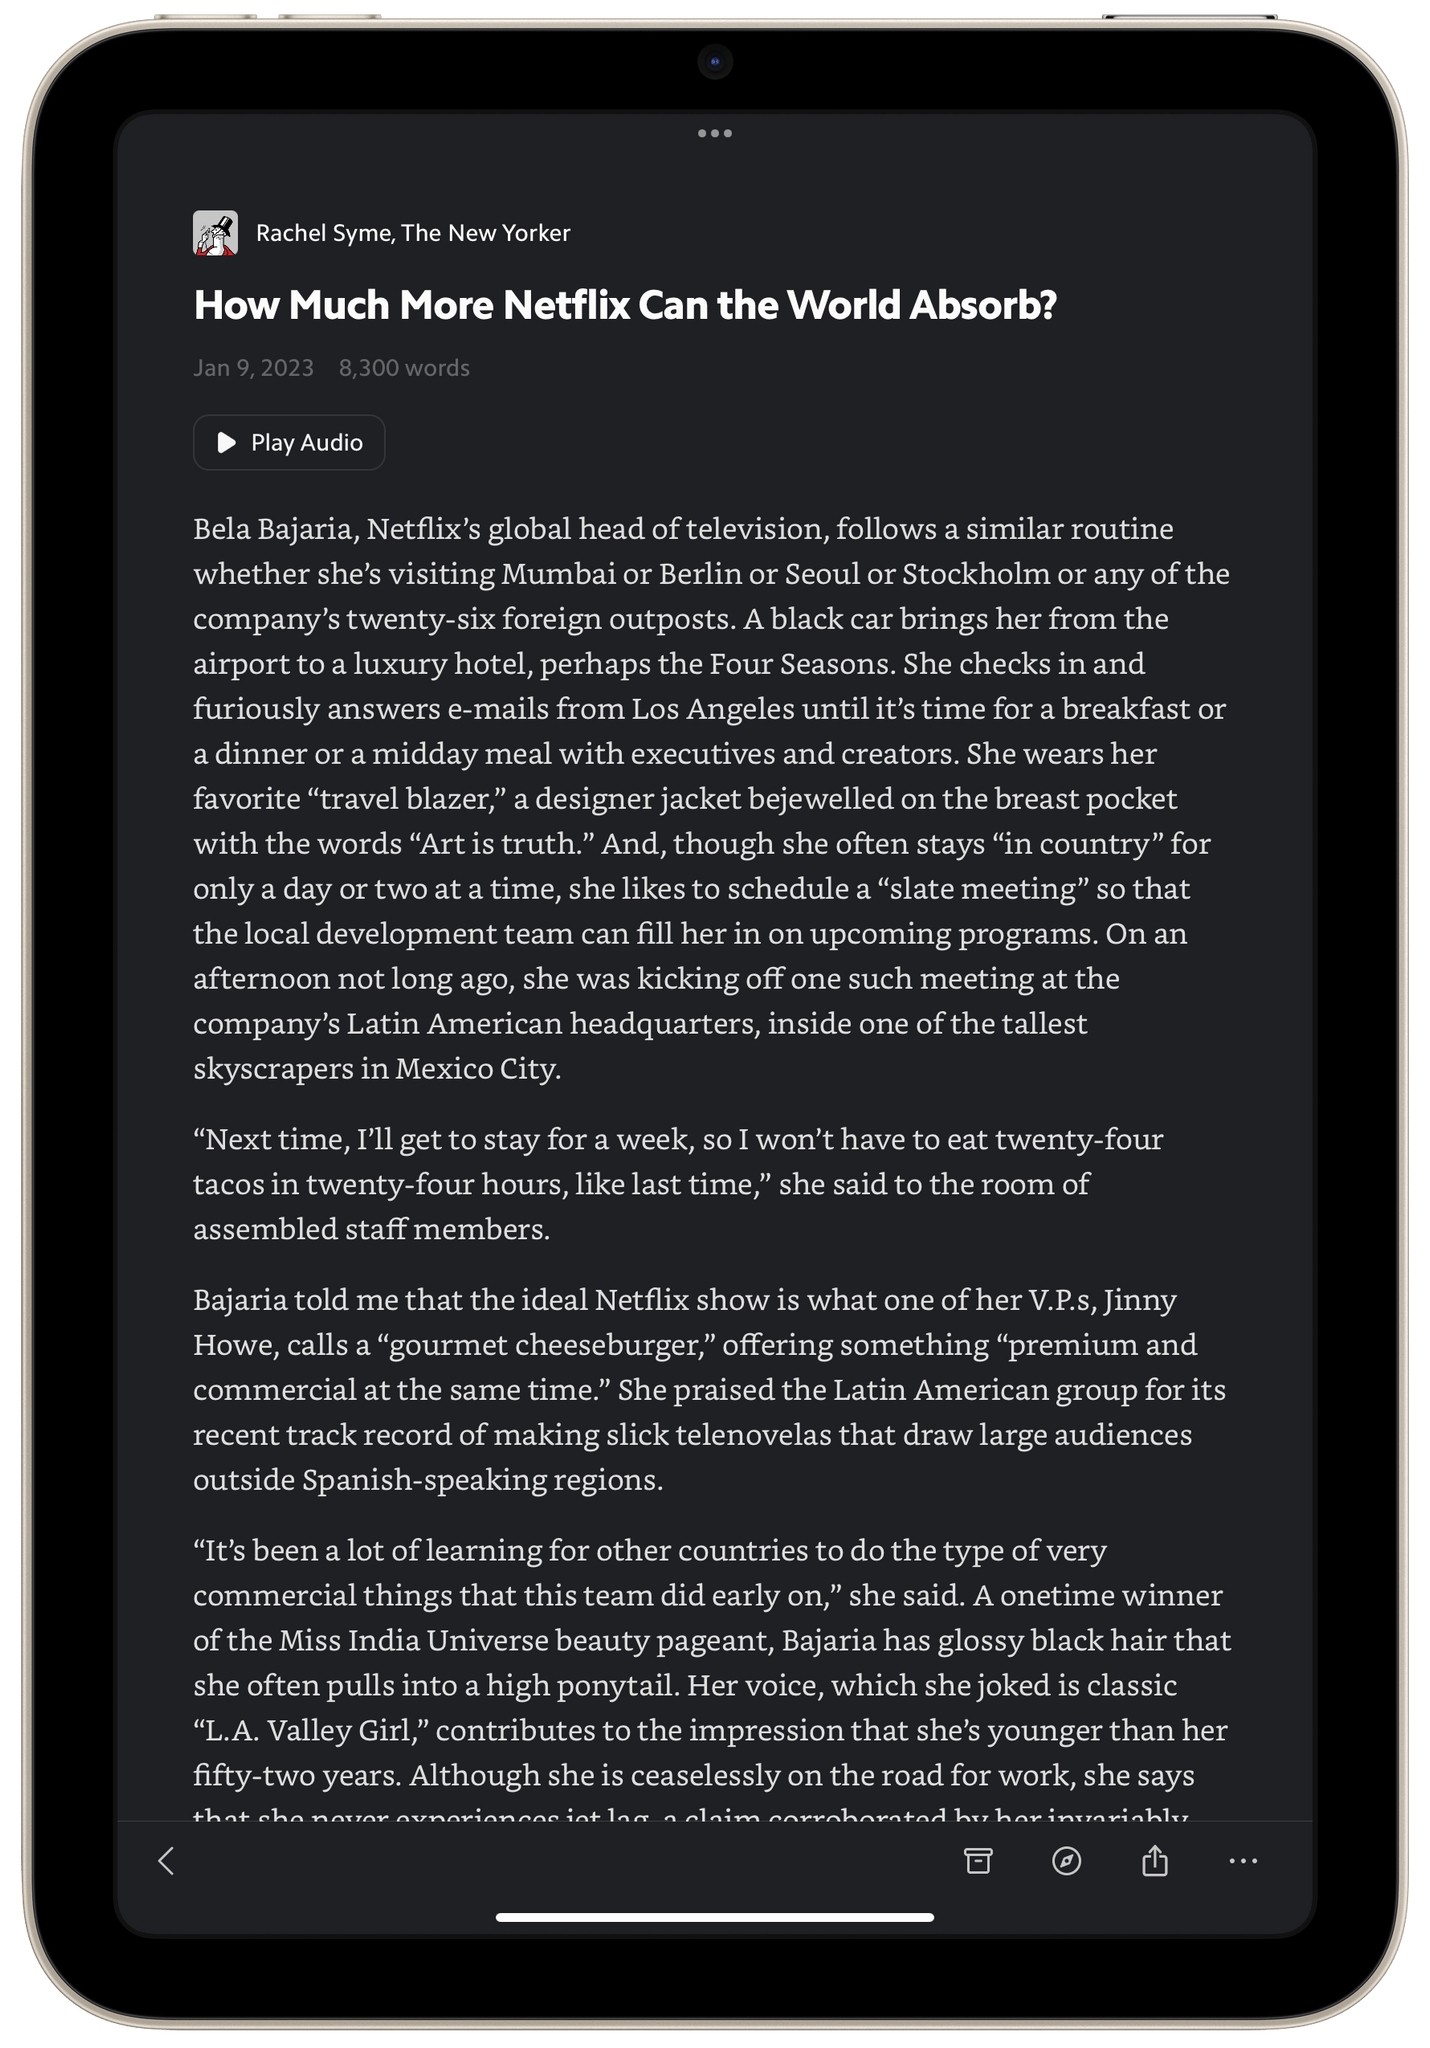 I do most of my Matter reading in the evening on my iPad mini using dark mode.